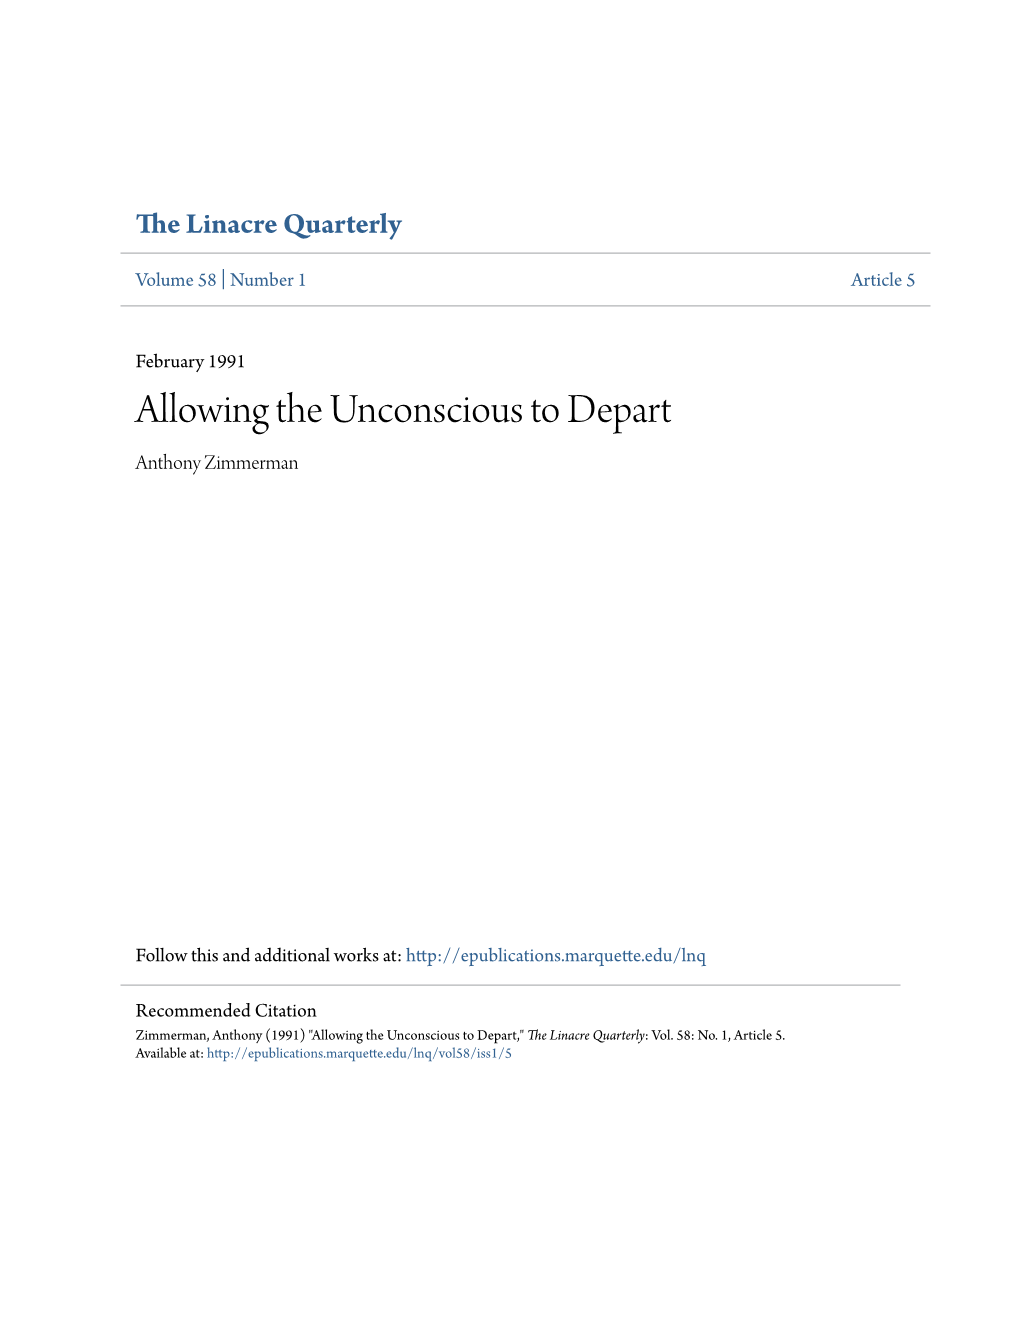 Allowing the Unconscious to Depart Anthony Zimmerman